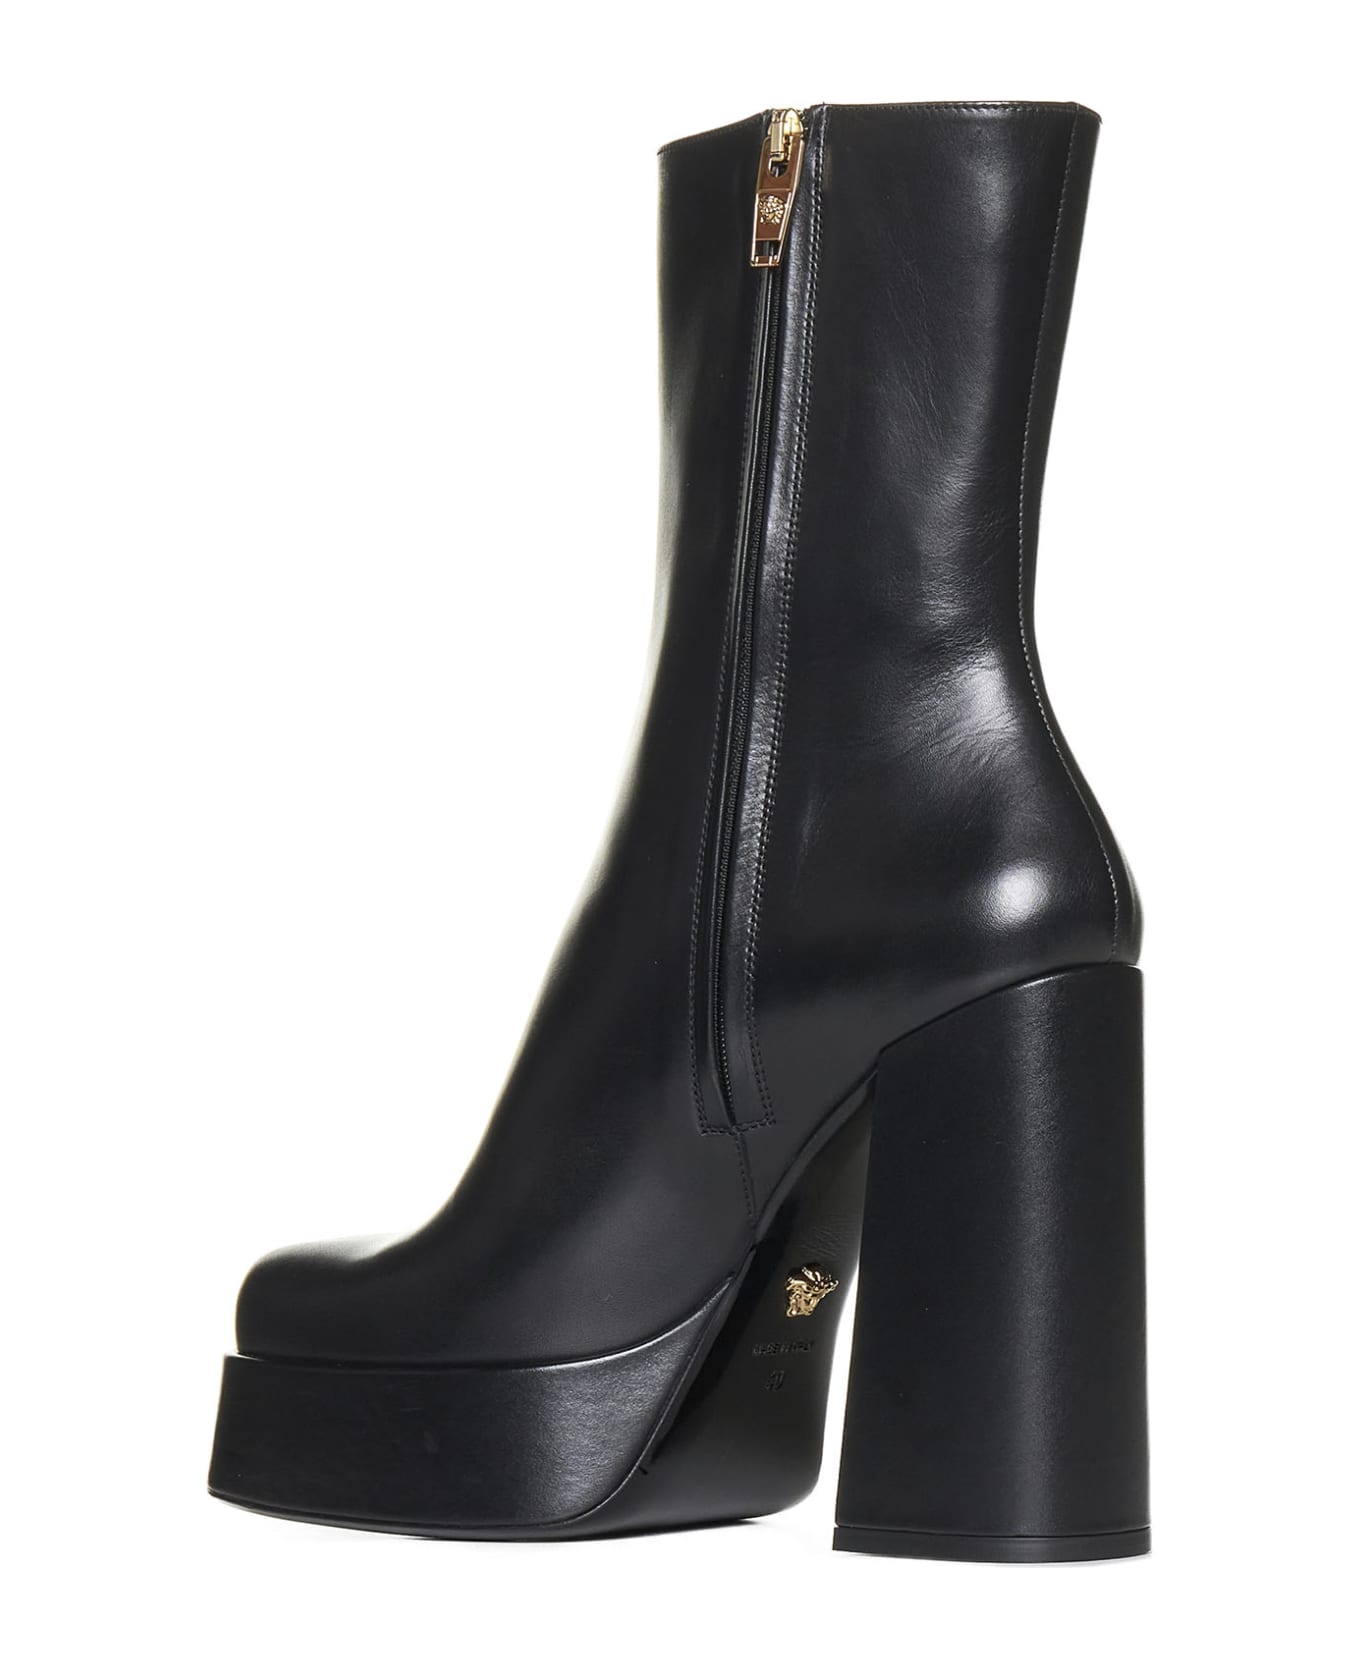 Versace Ankle Boots - Black ブーツ